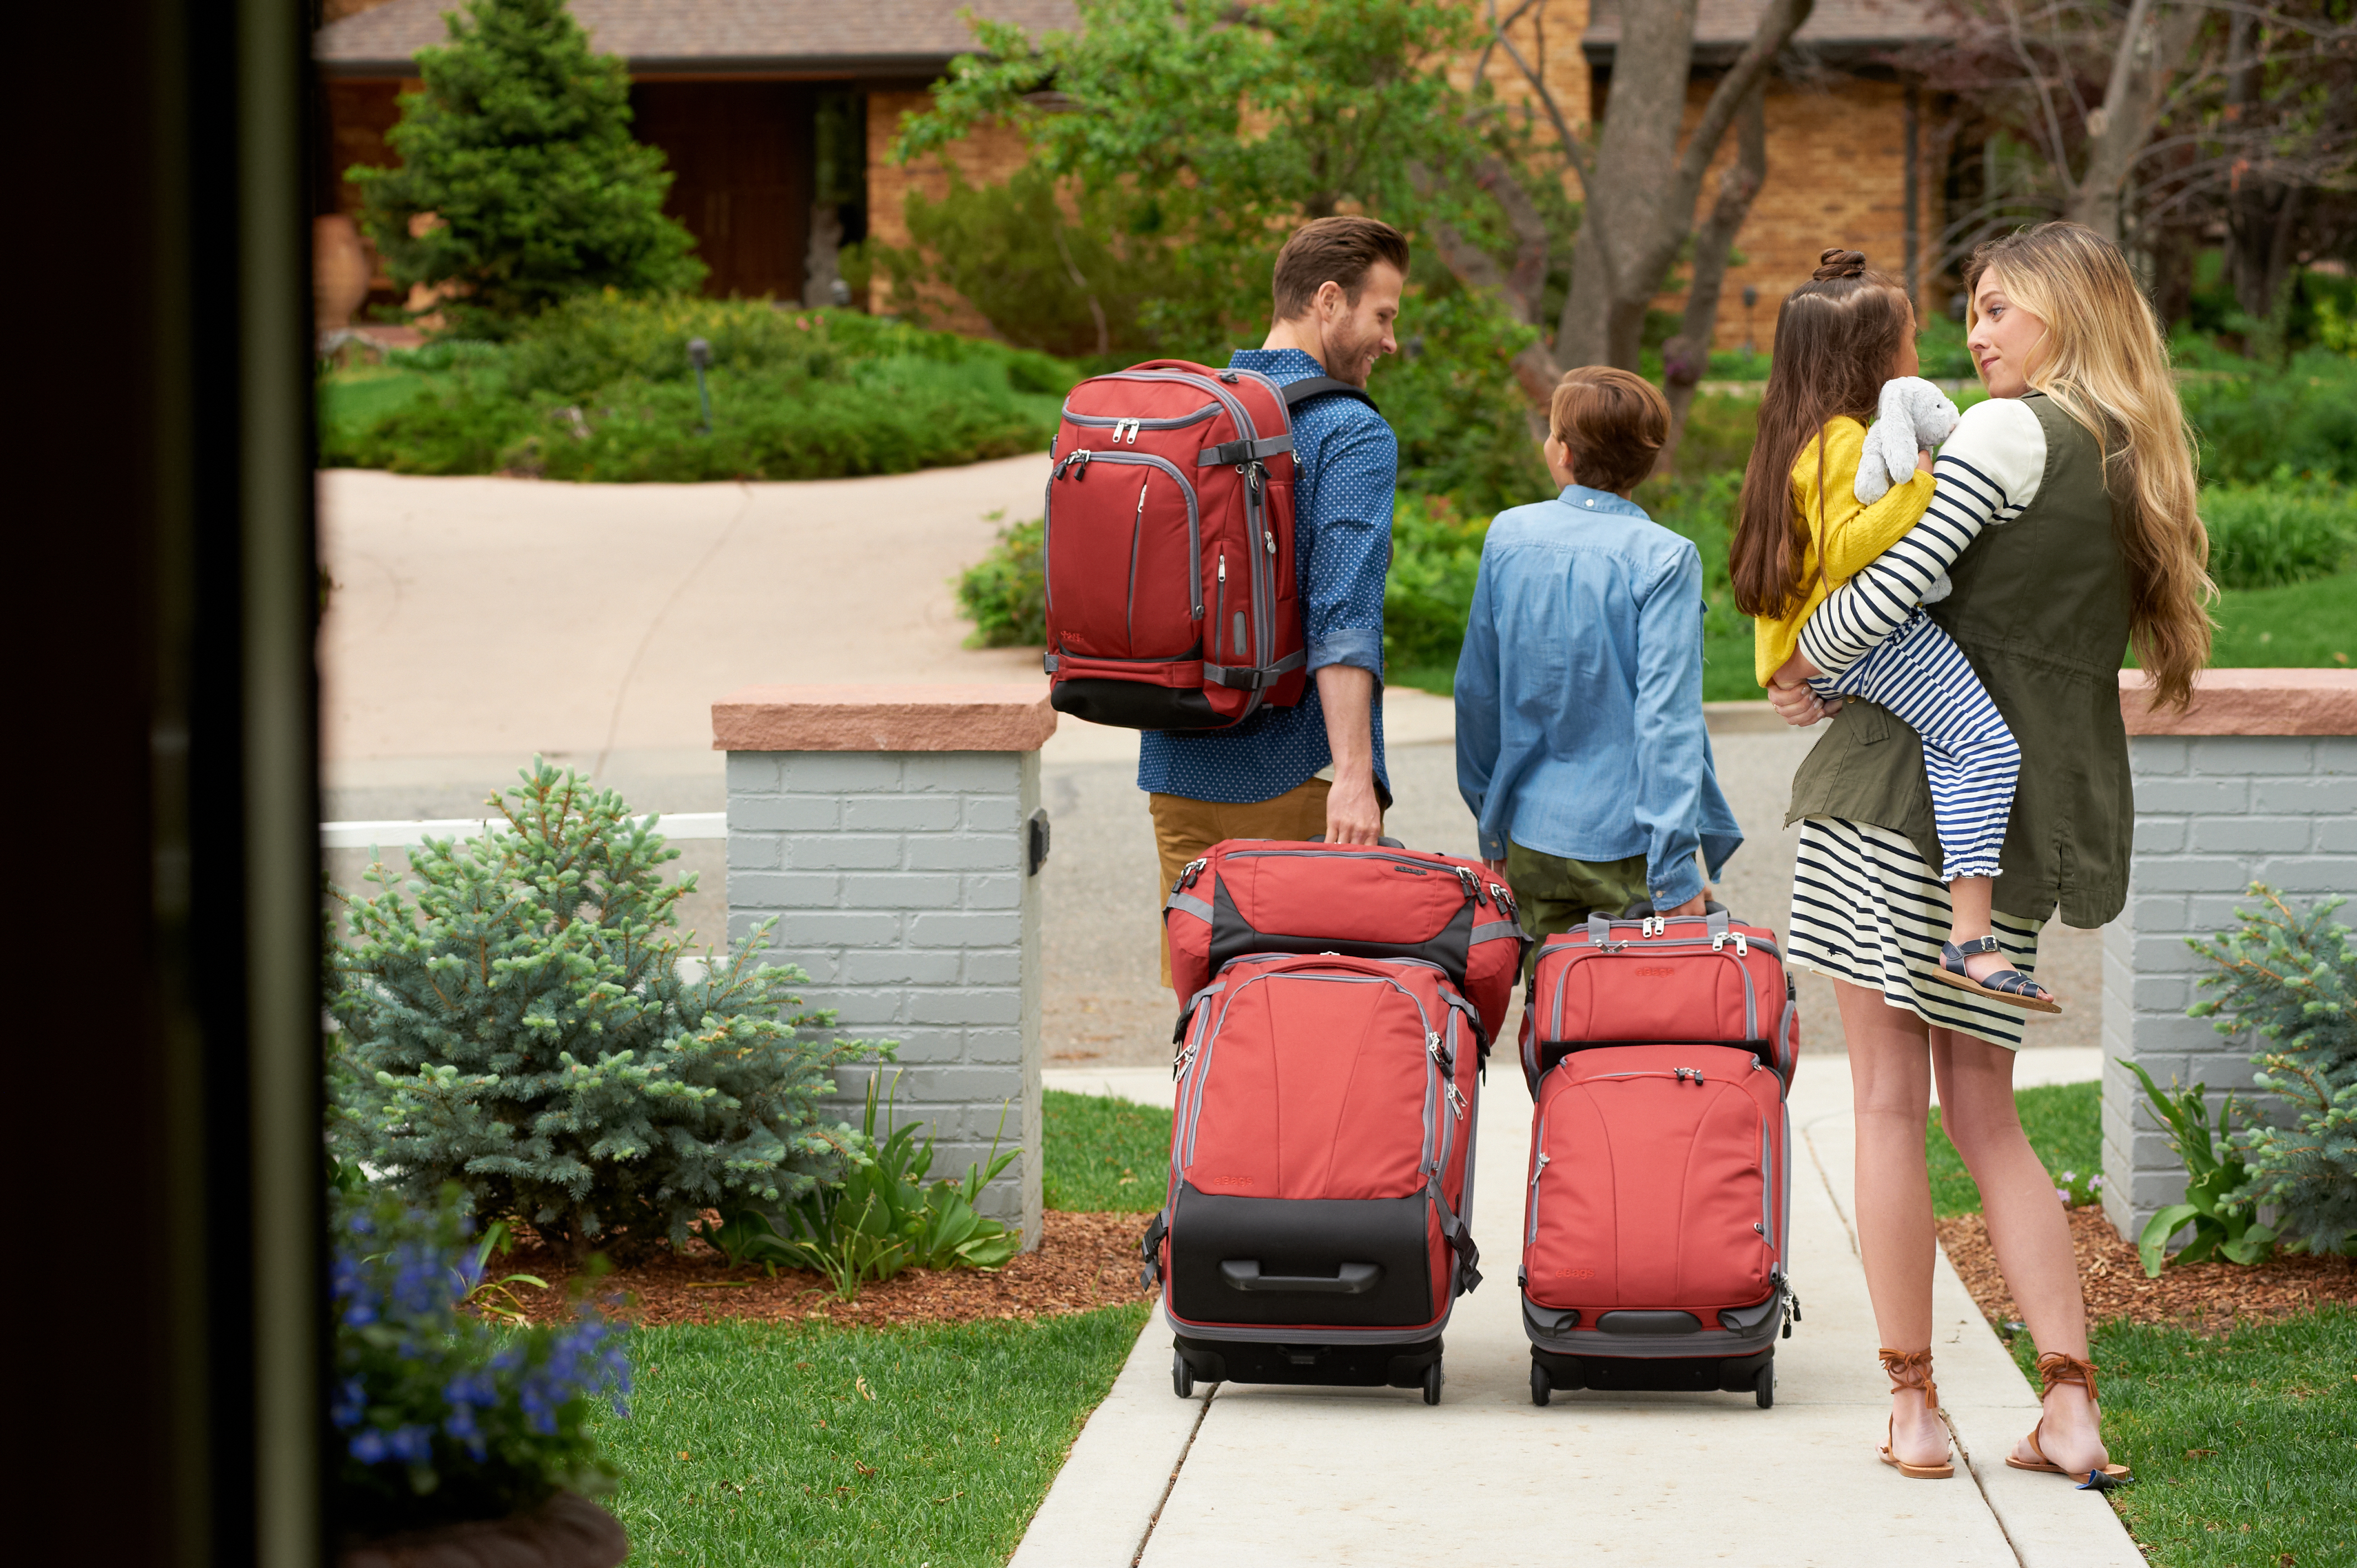 A family of four leaves a rental home, luggage in tow.